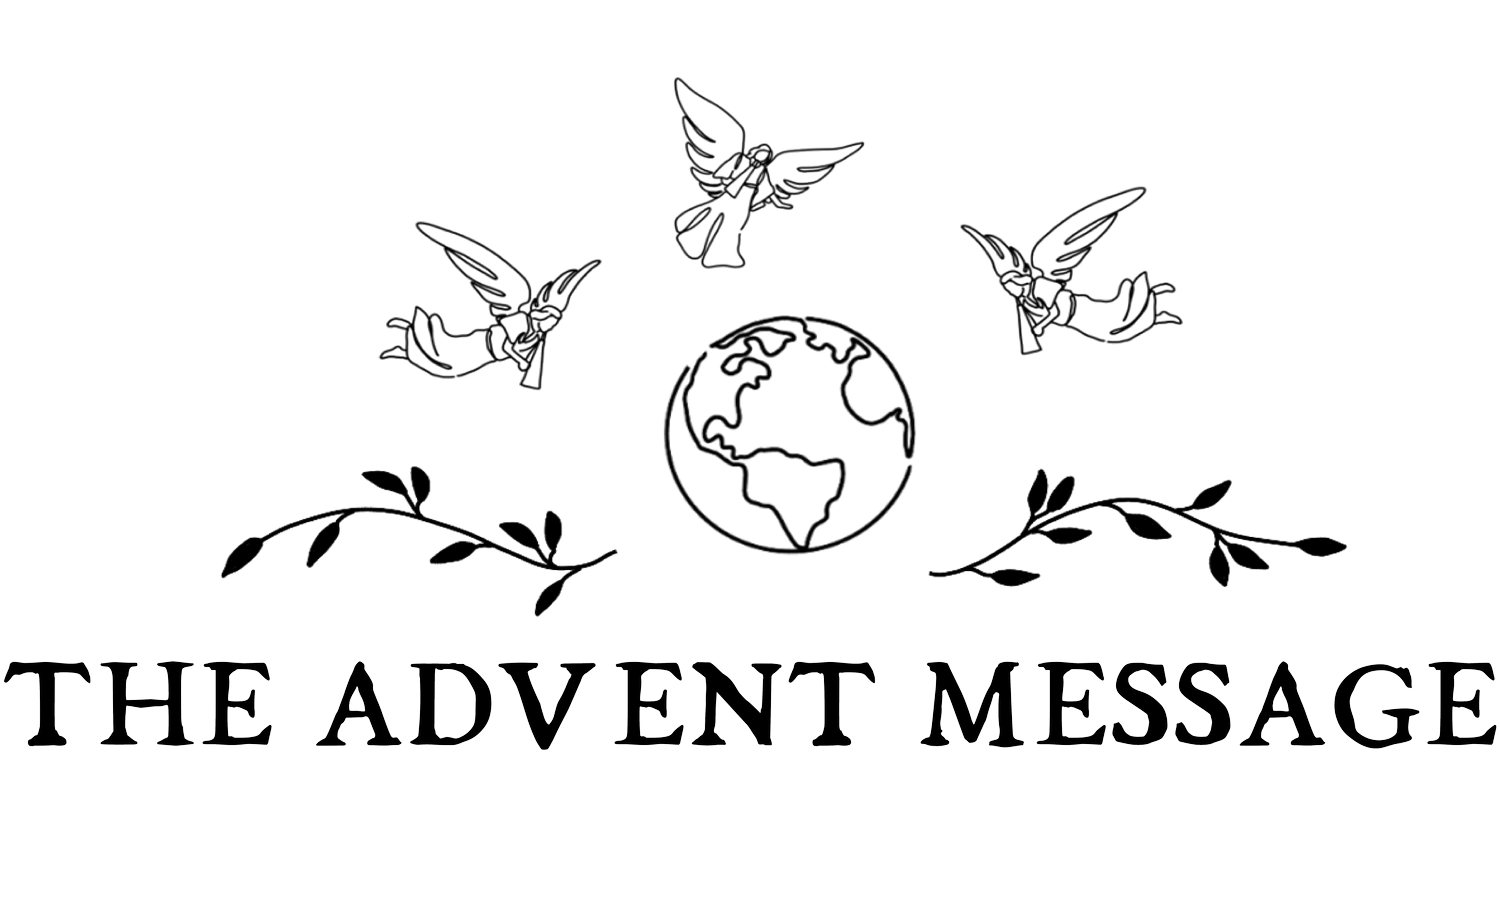 THE ADVENT MESSAGE